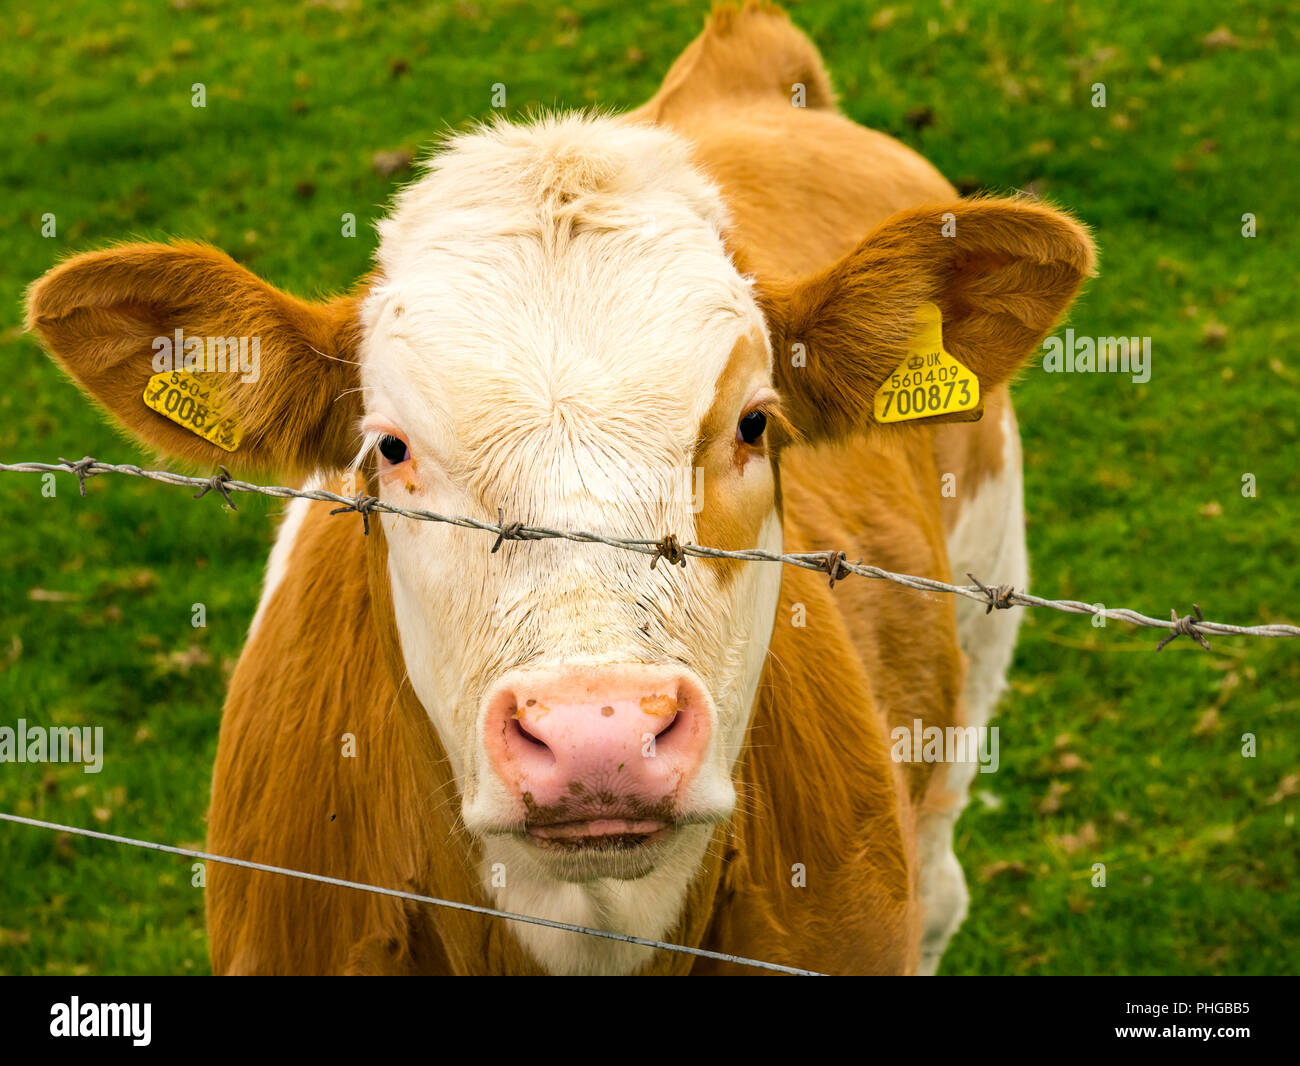 Close up of tagged young brown cow with white face by barbed wire fence in field, East Lothian, Scotland, UK Stock Photo